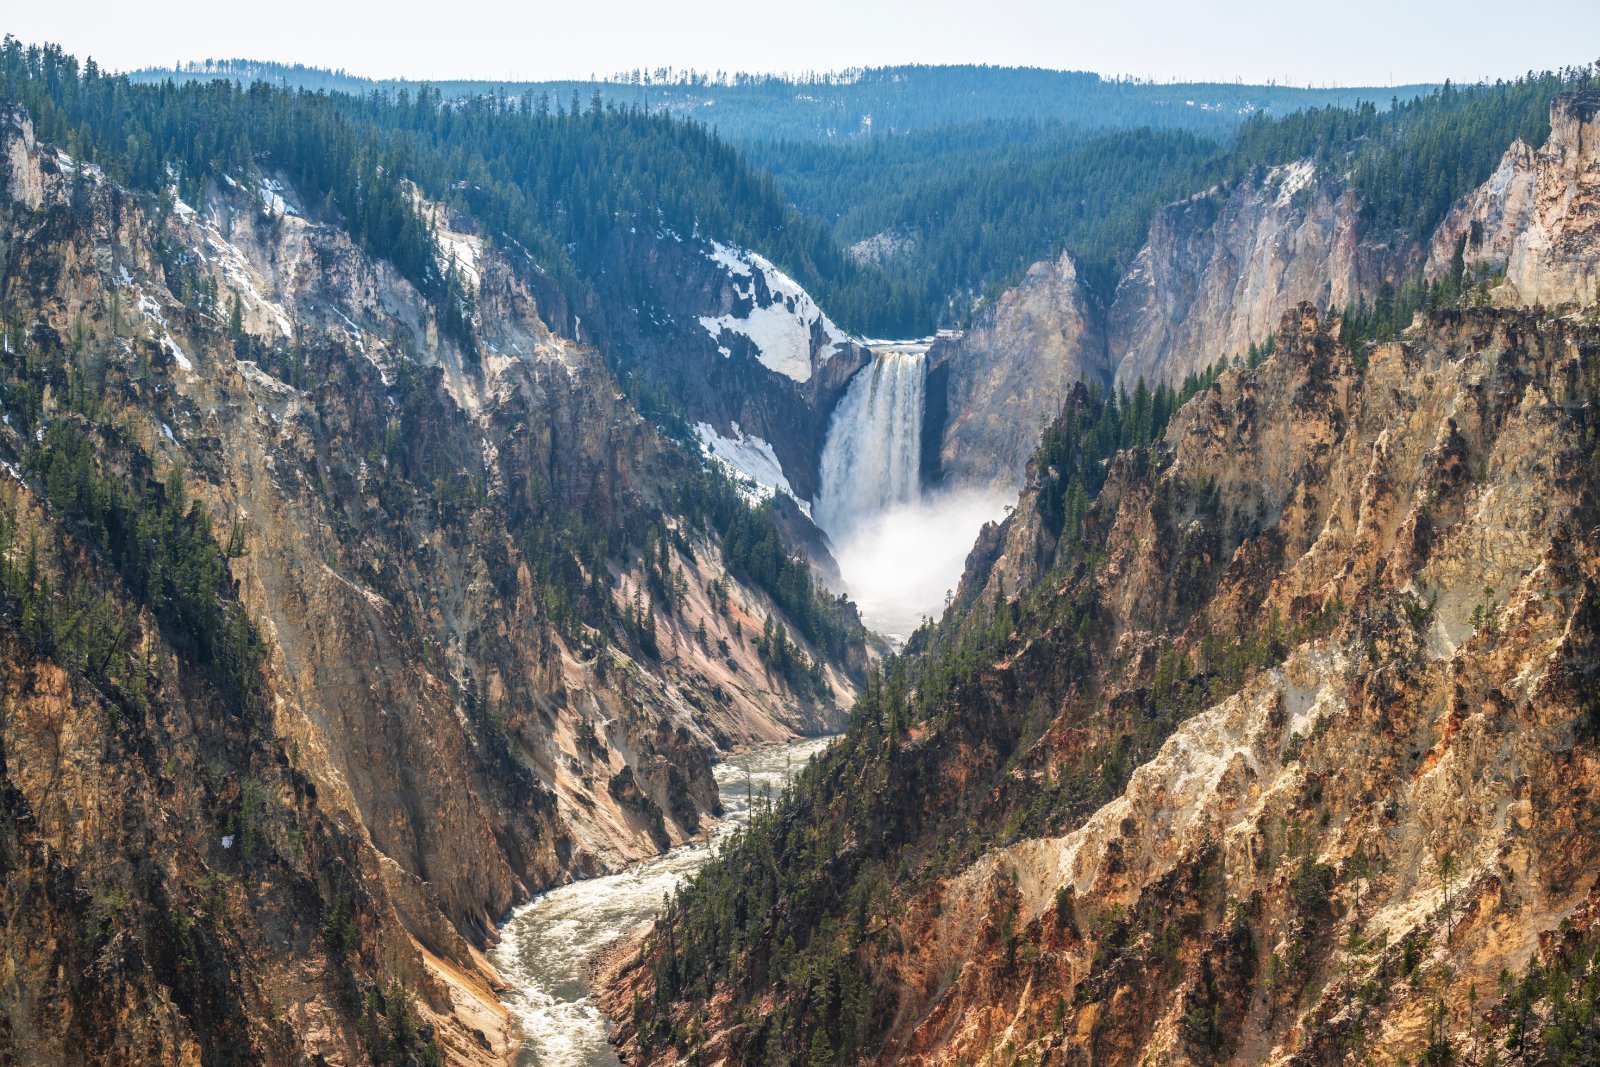 <p><span>I embarked on a hike to Artist Point on my journey toward Yellowstone Canyon. The trail led me to a great spot to see the majestic Lower Falls and the colorful canyon walls. The sheer beauty of the landscape left me in awe, and I took a moment to absorb the natural beauty surrounding me.</span></p>